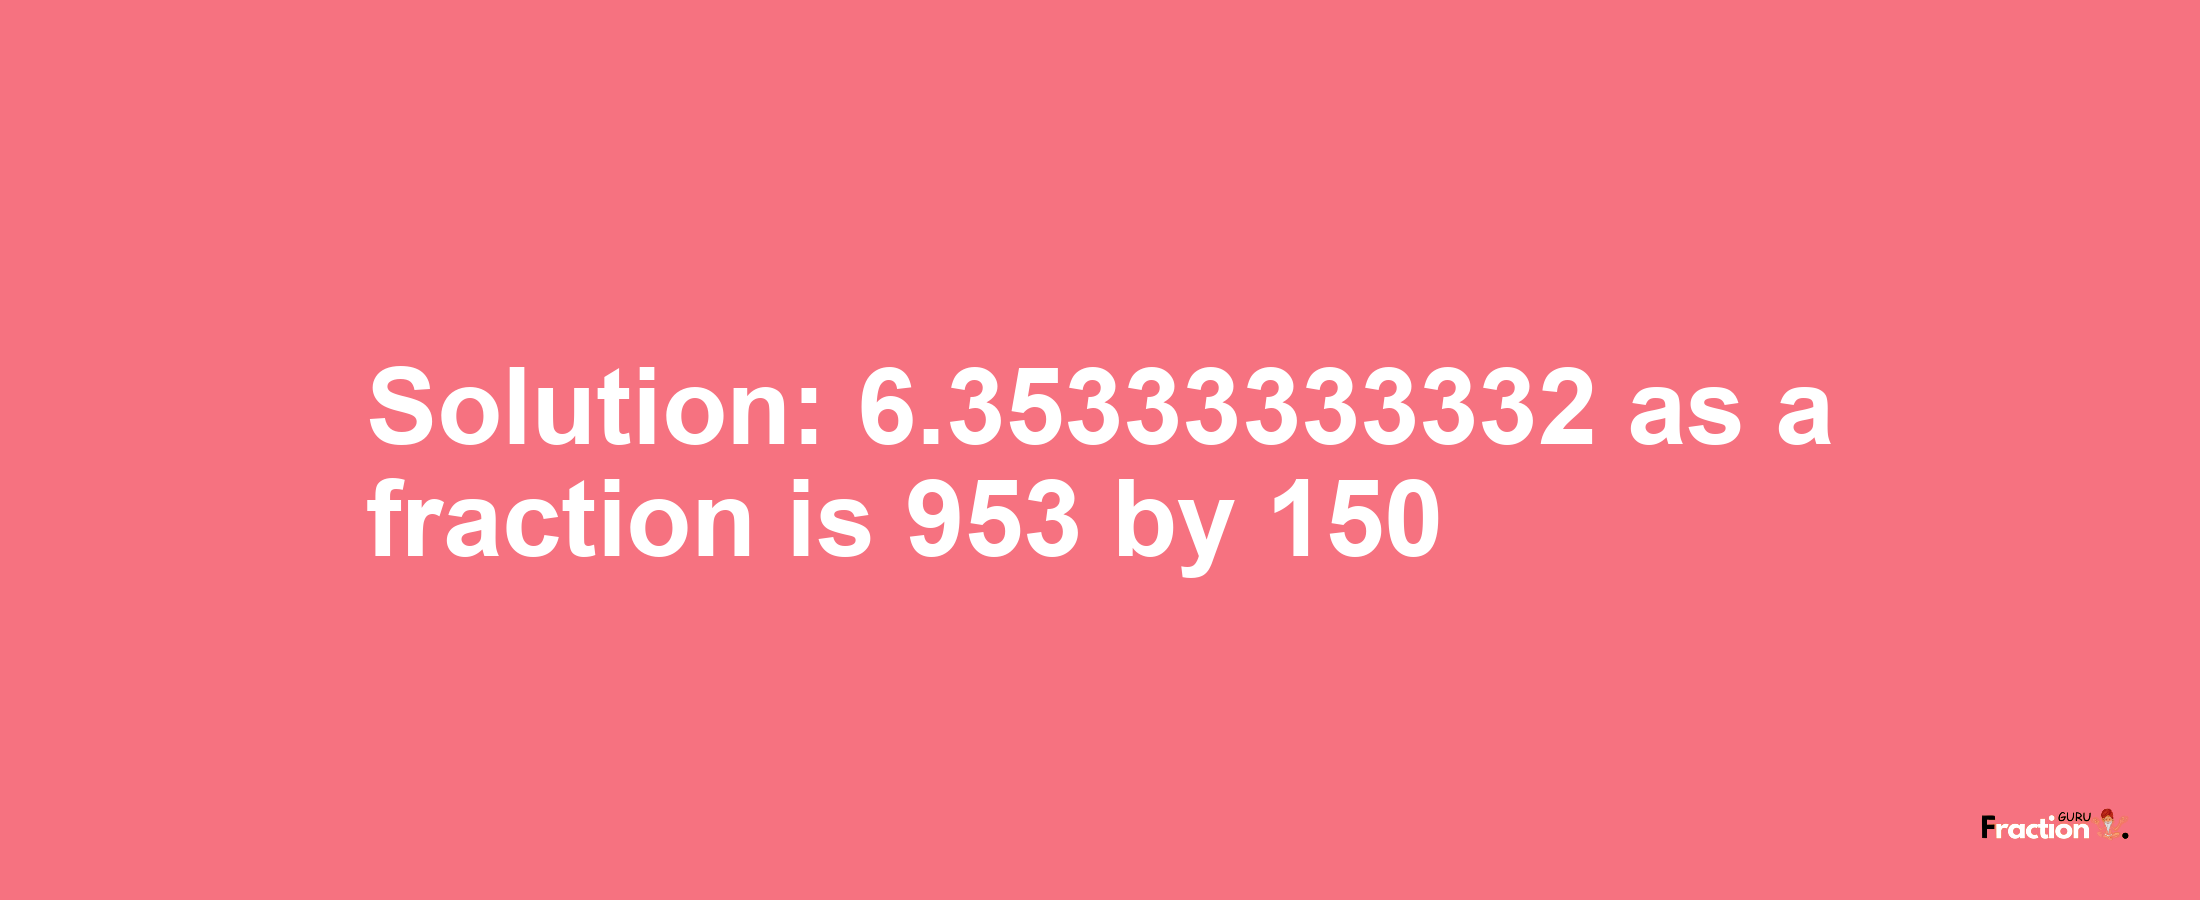 Solution:6.35333333332 as a fraction is 953/150